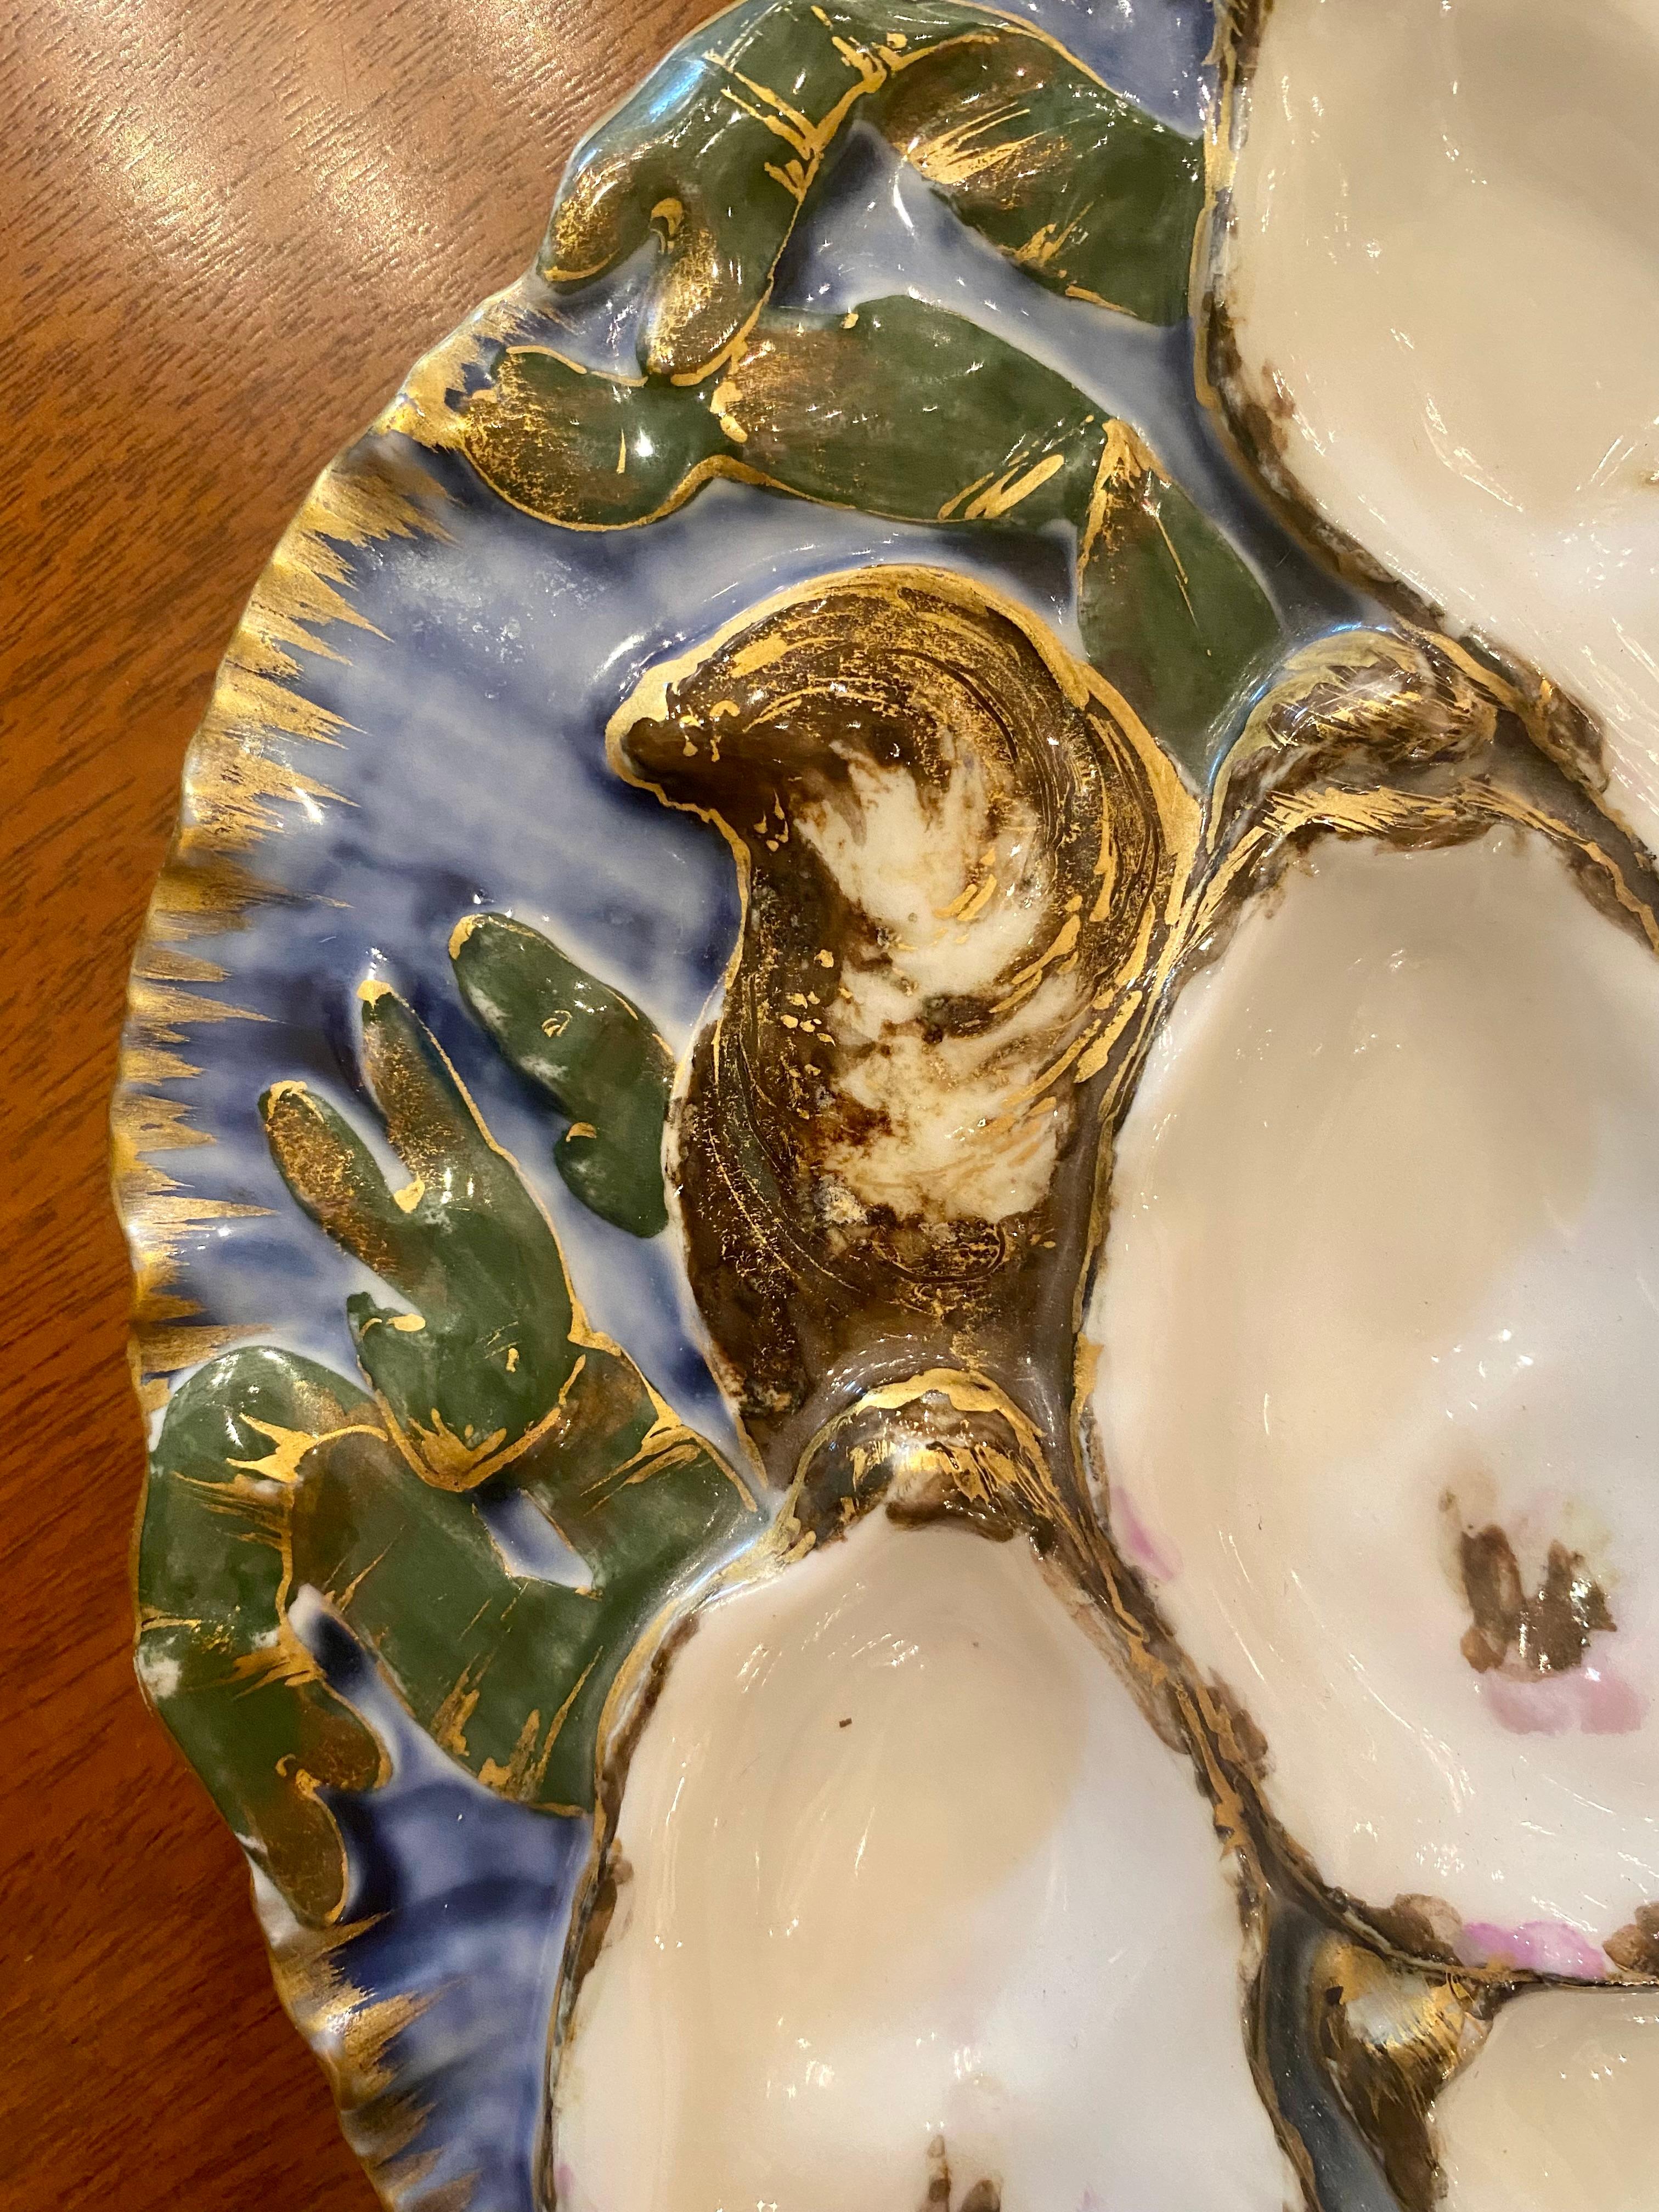 Antique French hand-painted limoges porcelain presidential oyster plate in the original Turkey pattern, Circa 1880's-1890's. 
Commissioned by the administration of American President Rutherford B. Hayes, this plate is the pinnacle of oyster plate